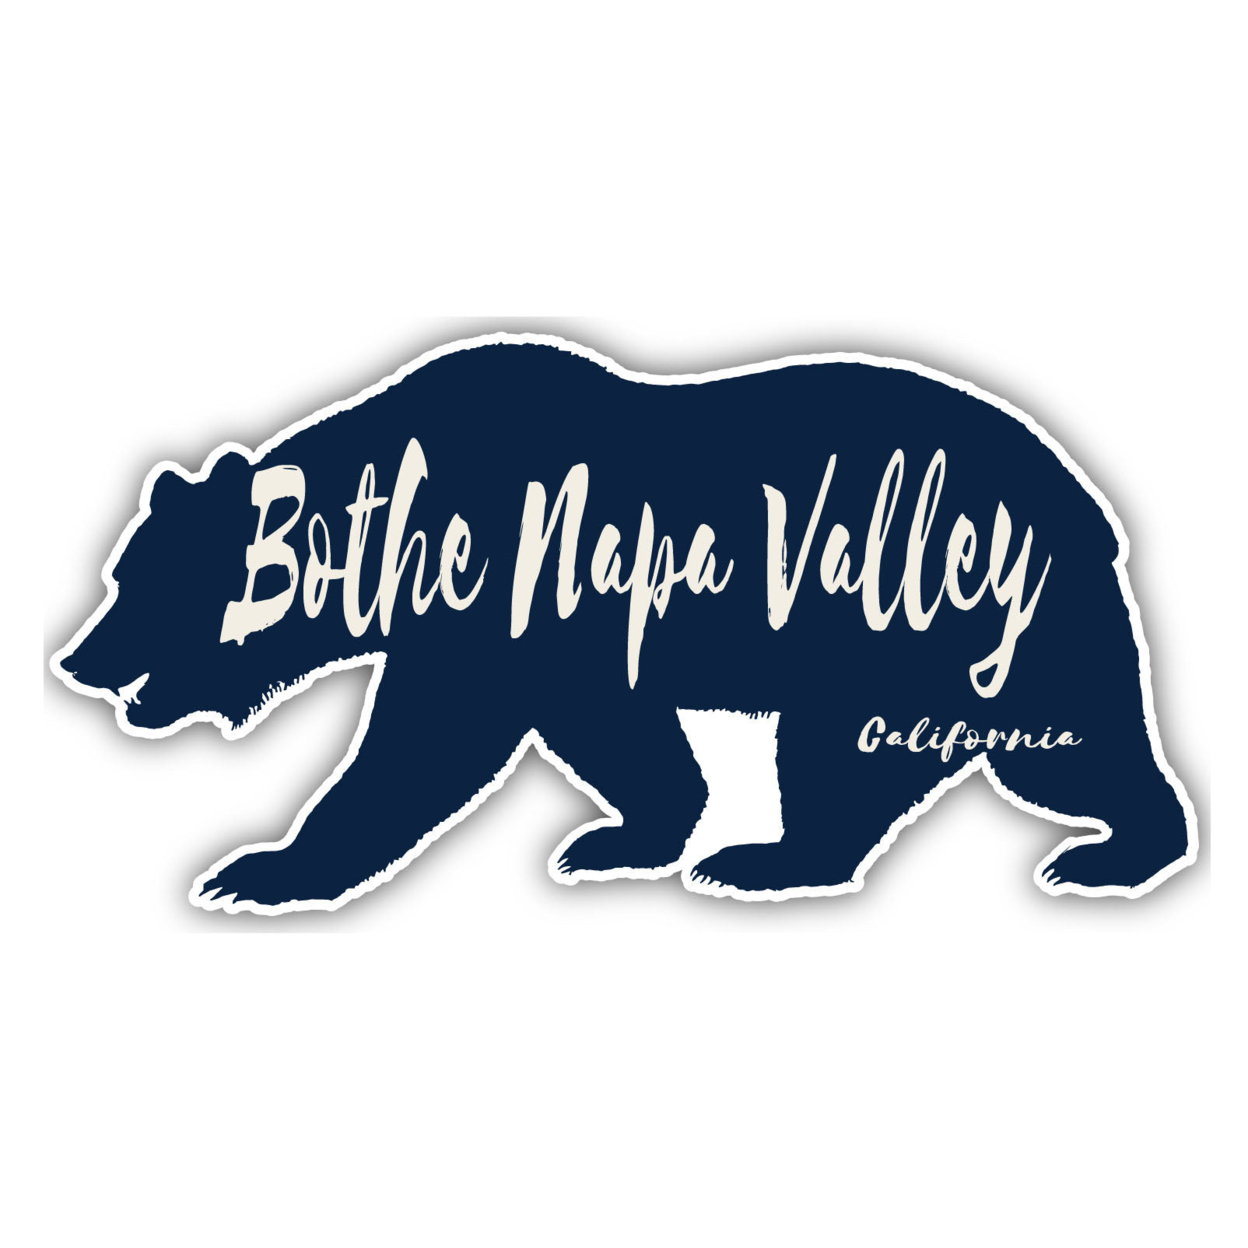 Bothe Napa Valley California Souvenir Decorative Stickers (Choose Theme And Size) - 4-Pack, 8-Inch, Bear